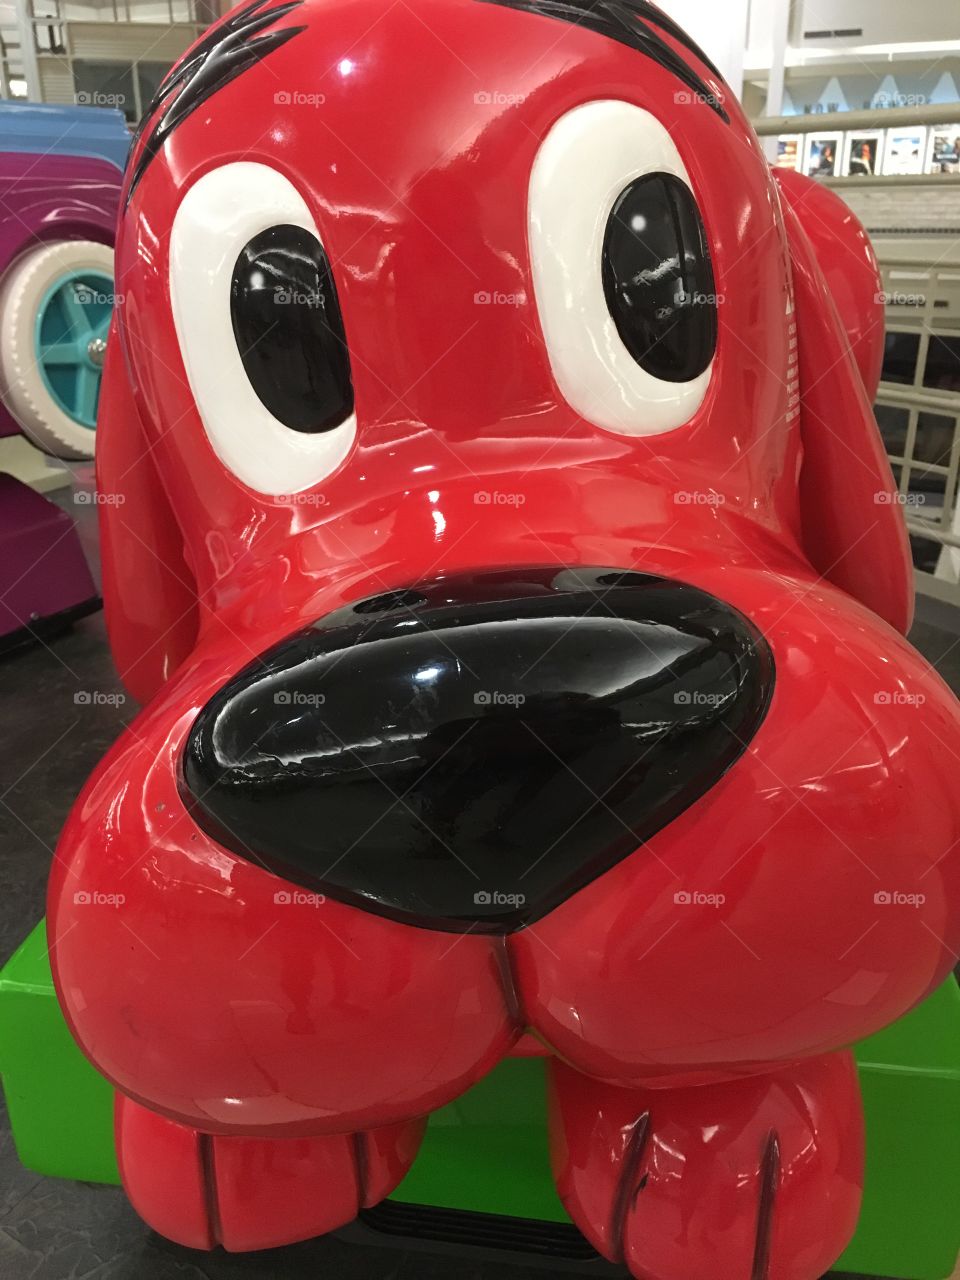 Clifford the Big Red Dog. 